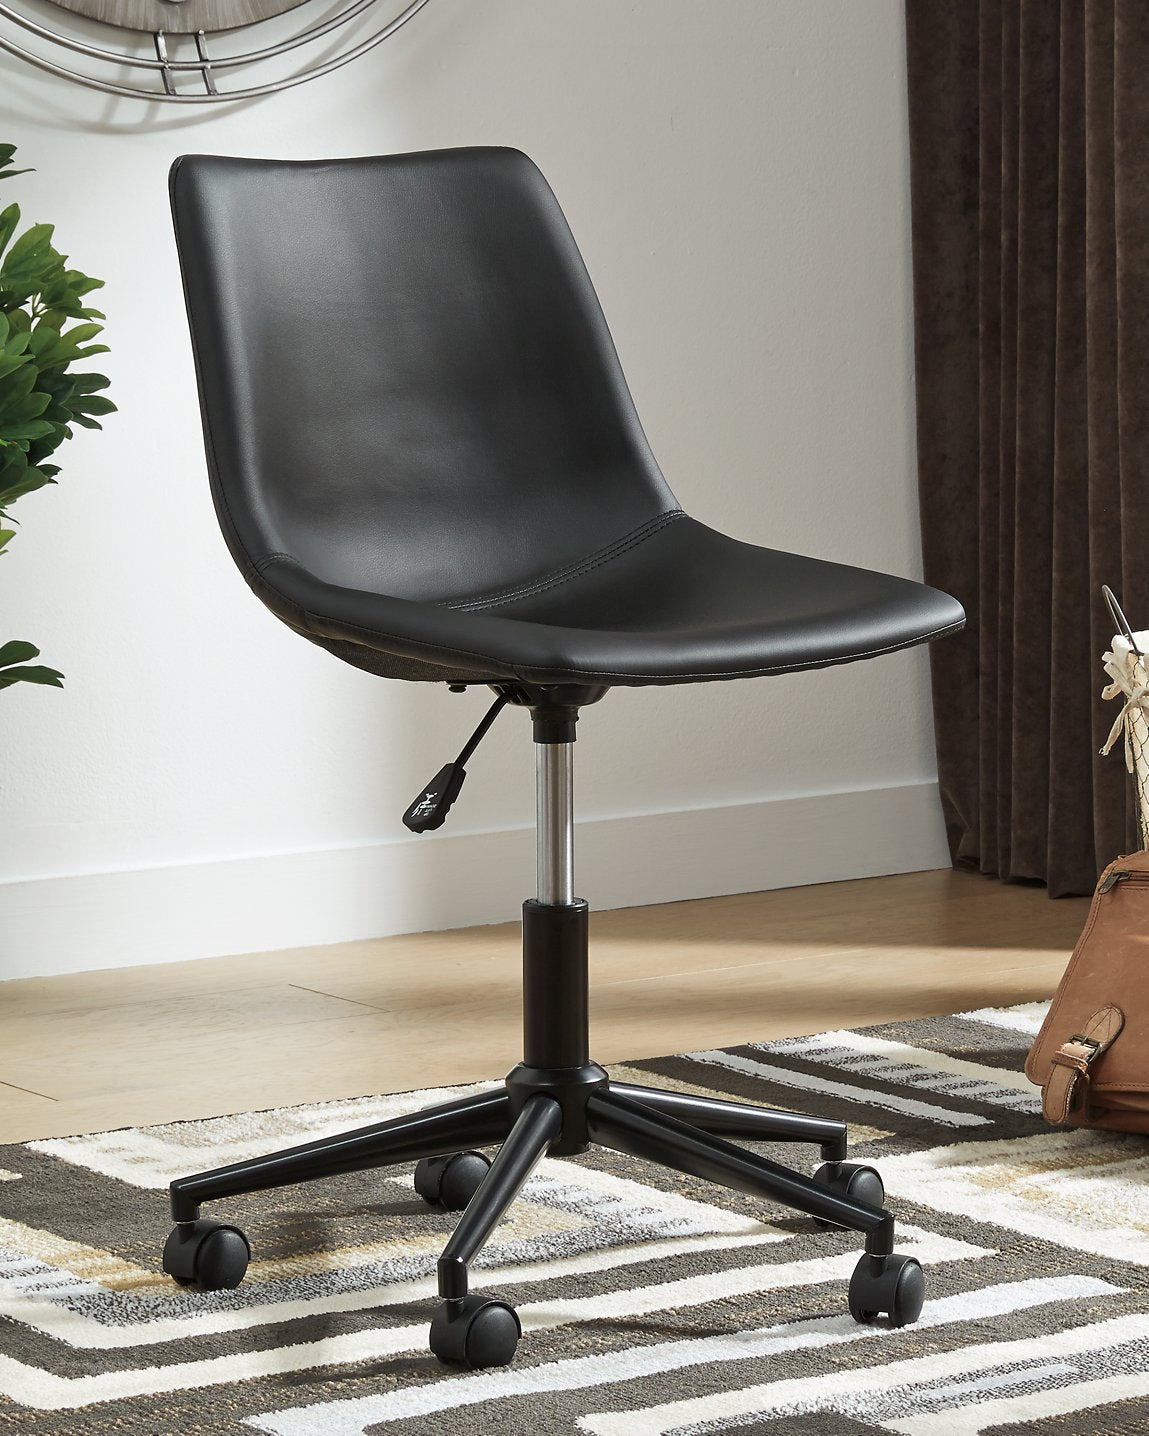 Office Chair Program Home Office Desk Chair - Half Price Furniture